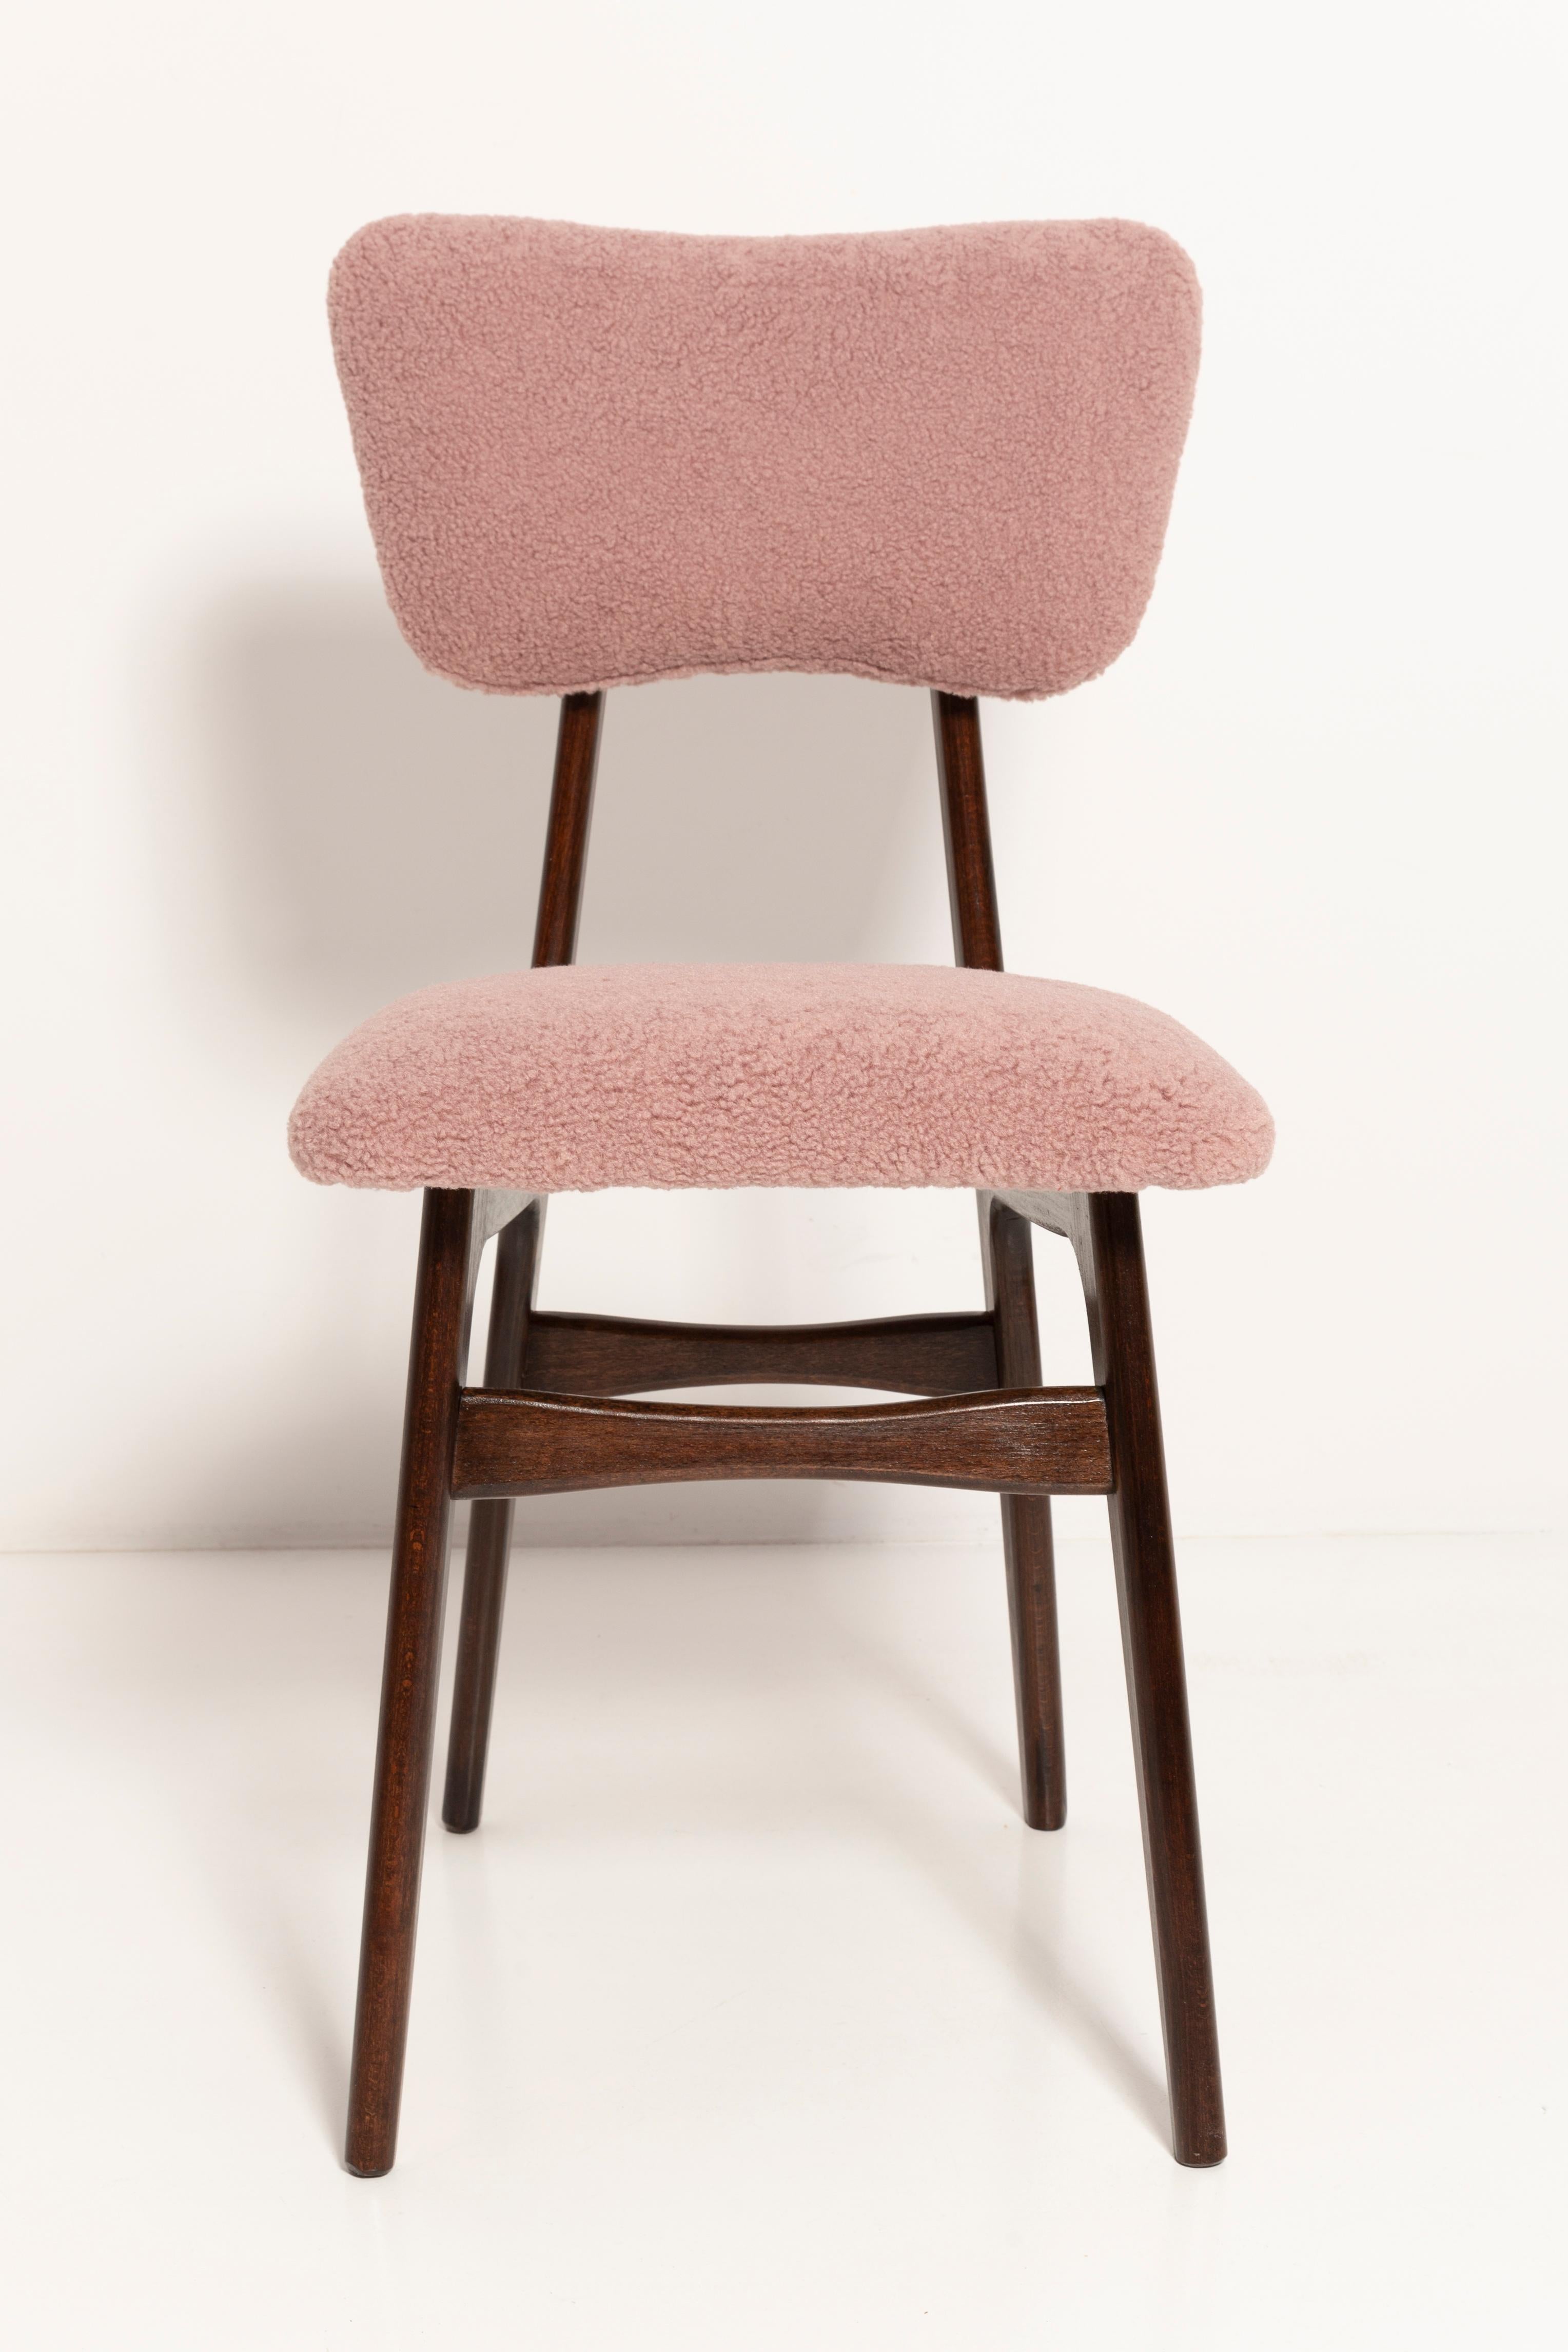 Set of Seven Mid Century Butterfly Dining Chairs, Pink Boucle, Europe, 1960s For Sale 2